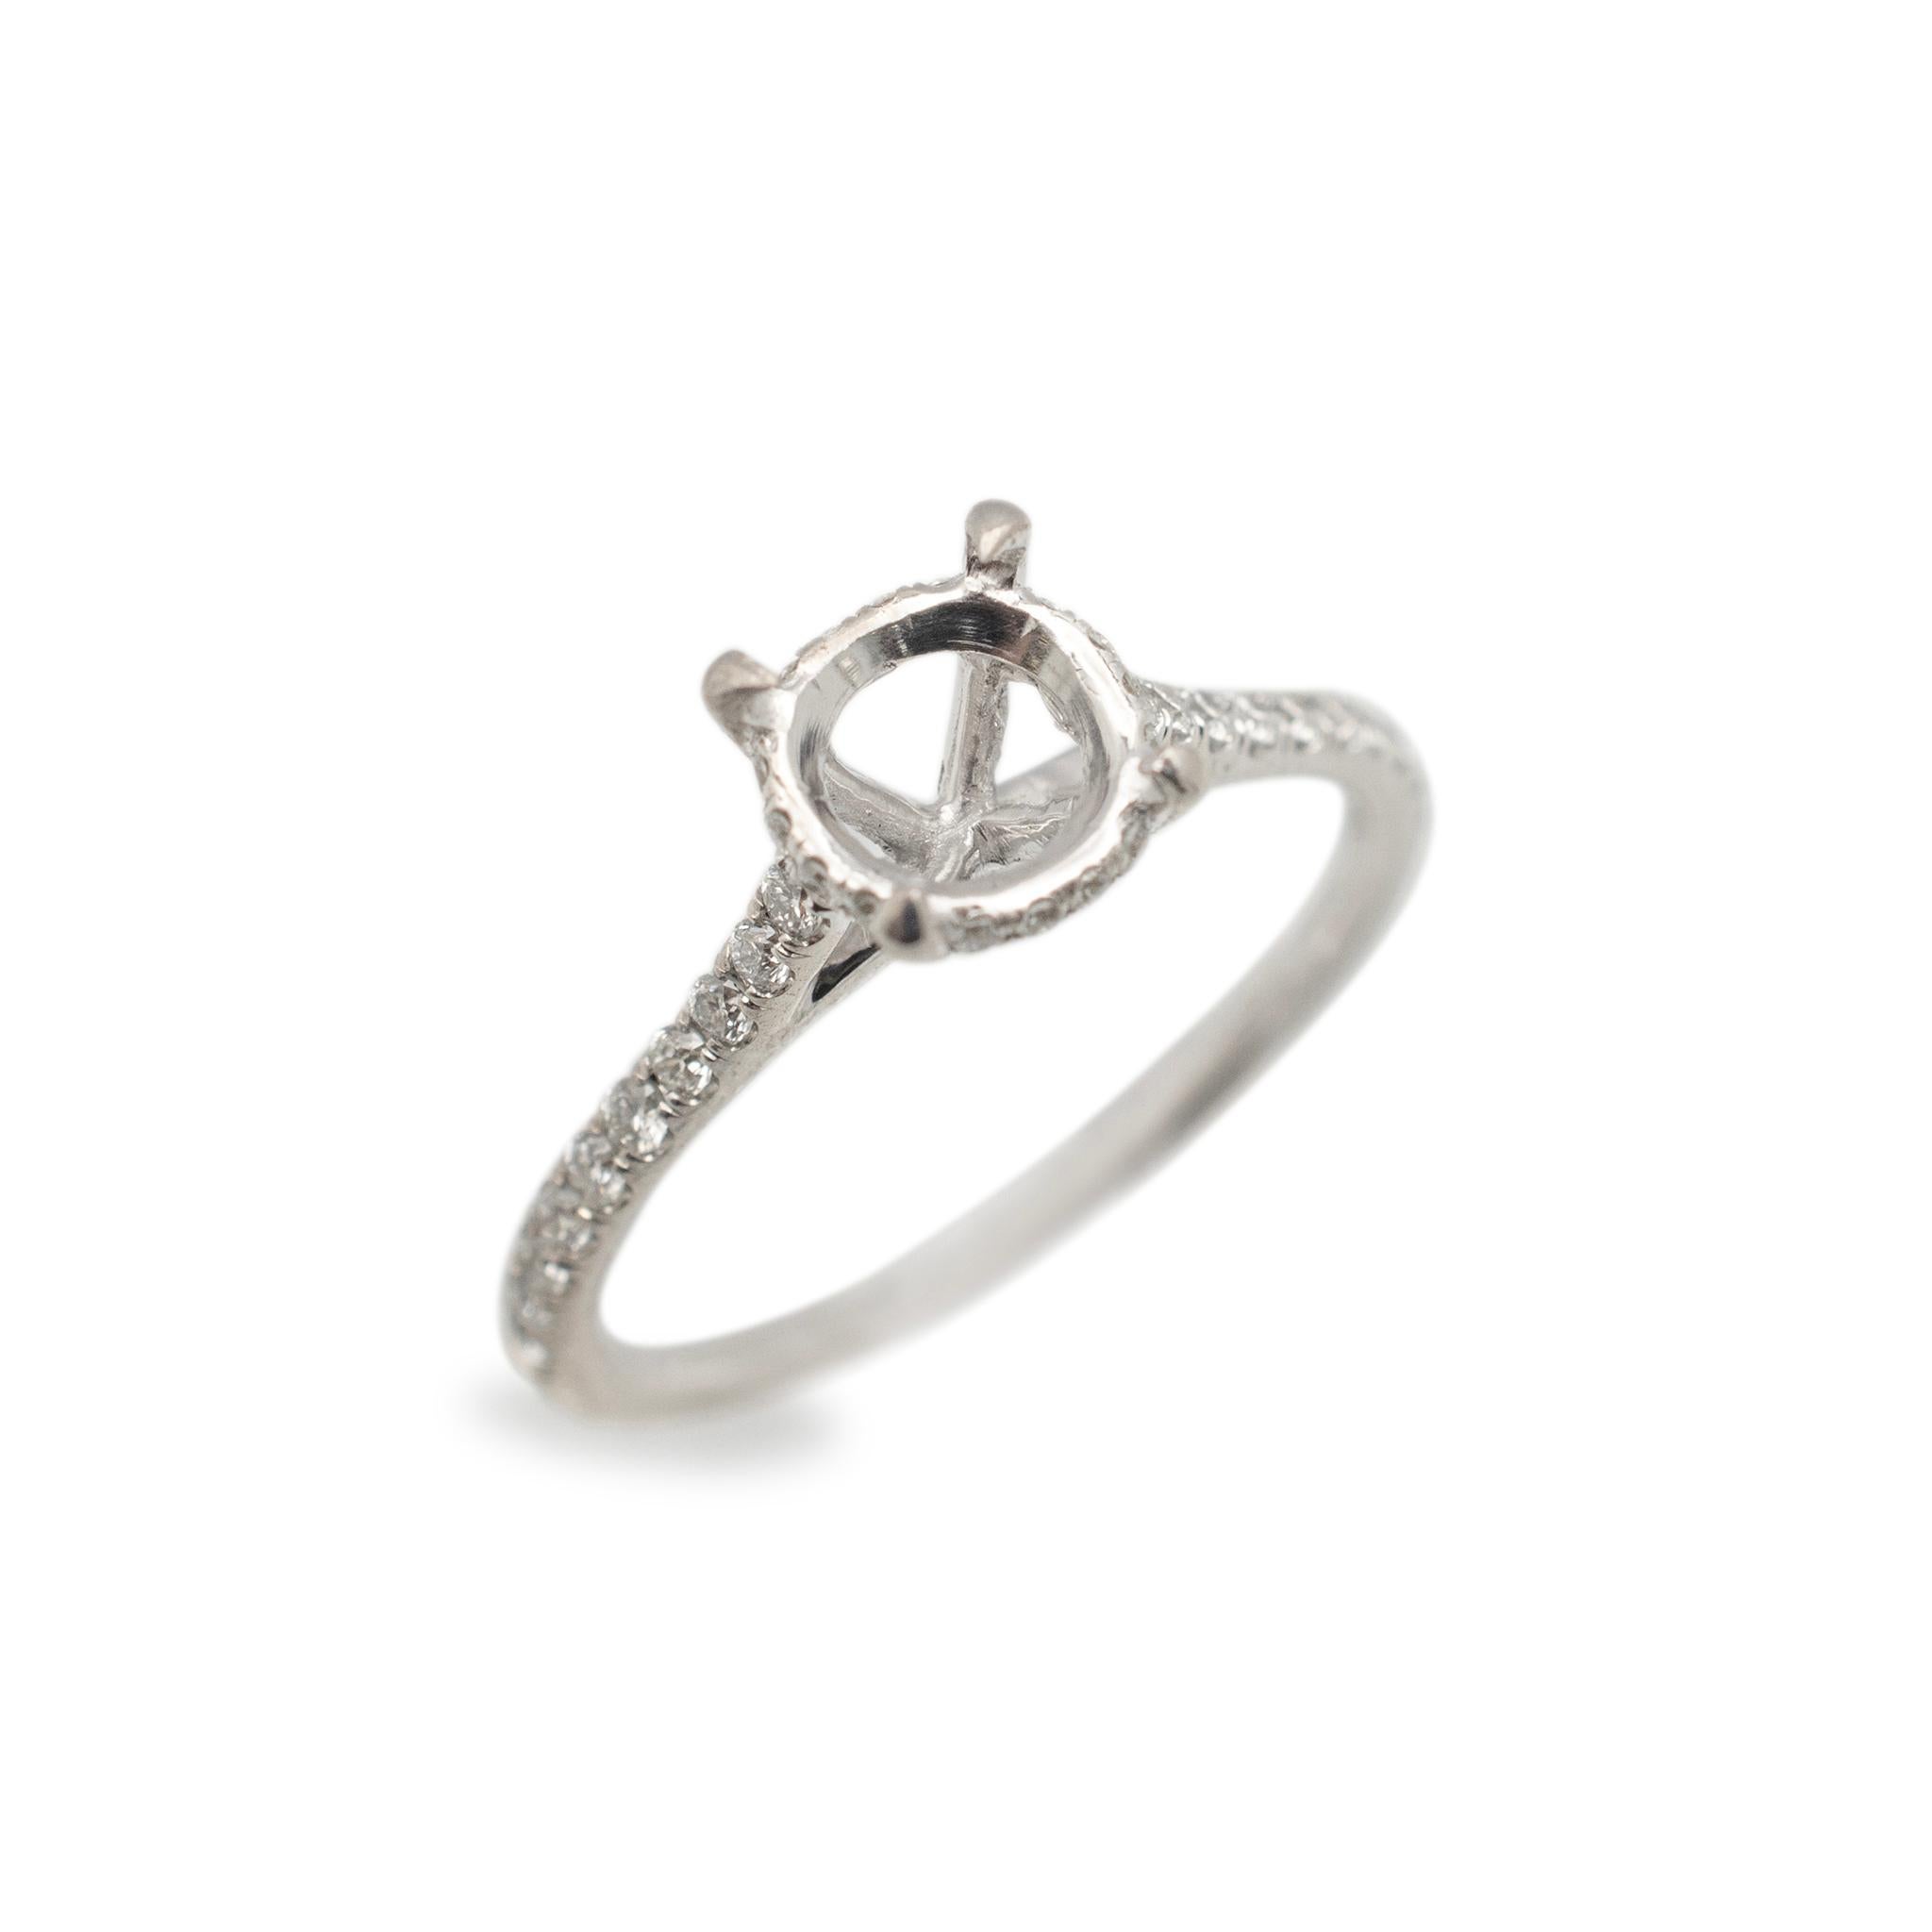 Gender: Ladies

Metal Type: 14K White Gold

Size: 4.75

Shank Maximum Width: 1.50 mm

Weight: 1.48 grams

Ladies 14K white gold diamond engagement semi-mount accented hidden halo ring with a half round shank. The metal was tested and determined to